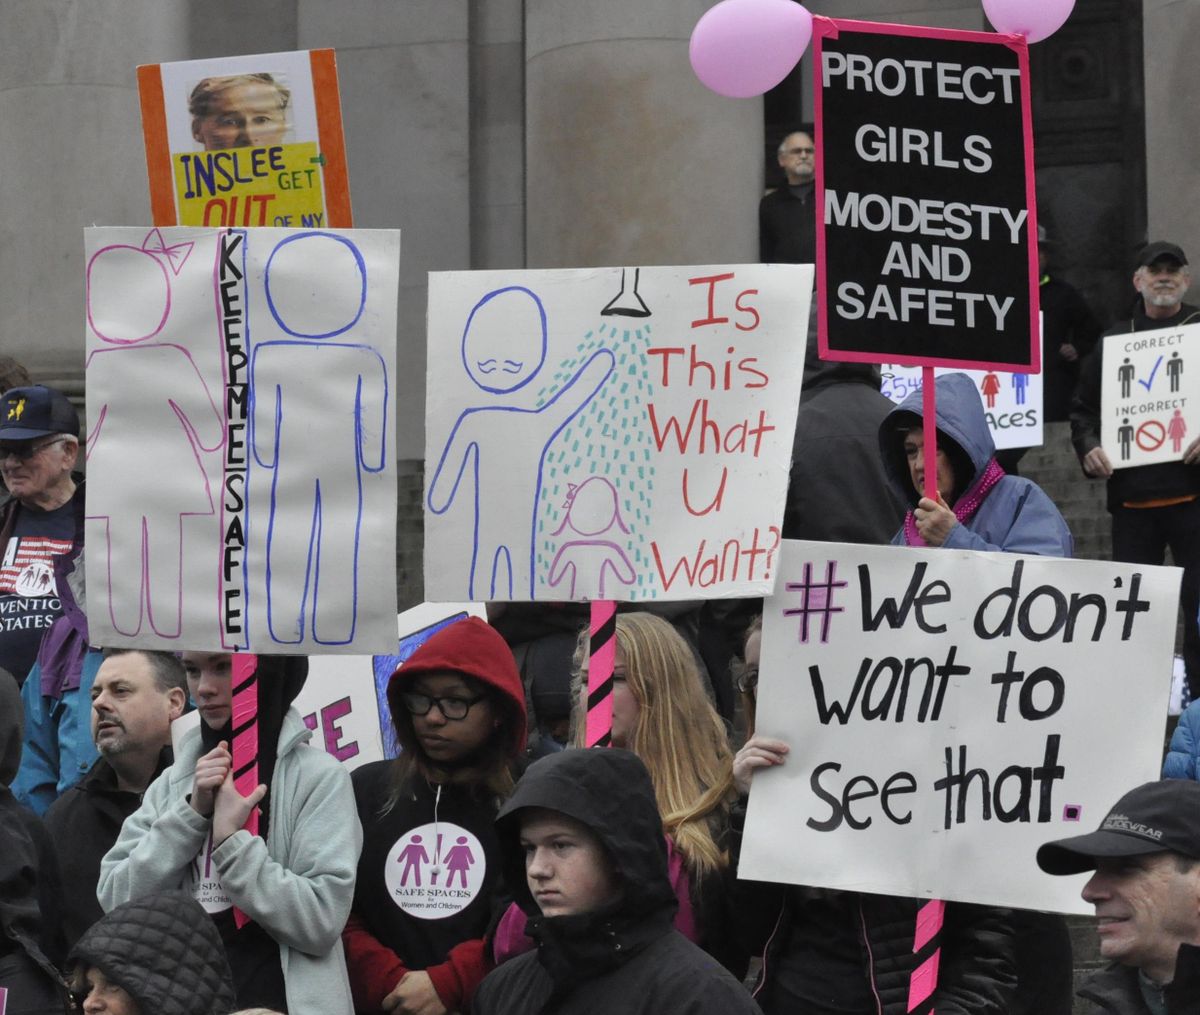 OLYMPIA – Protesters gathered on the Capitol steps last February to denounce a rule that transgender people can use public restrooms and locker rooms based on their gender identity rather than their anatomy. (Jim Camden / The Spokesman-Review)